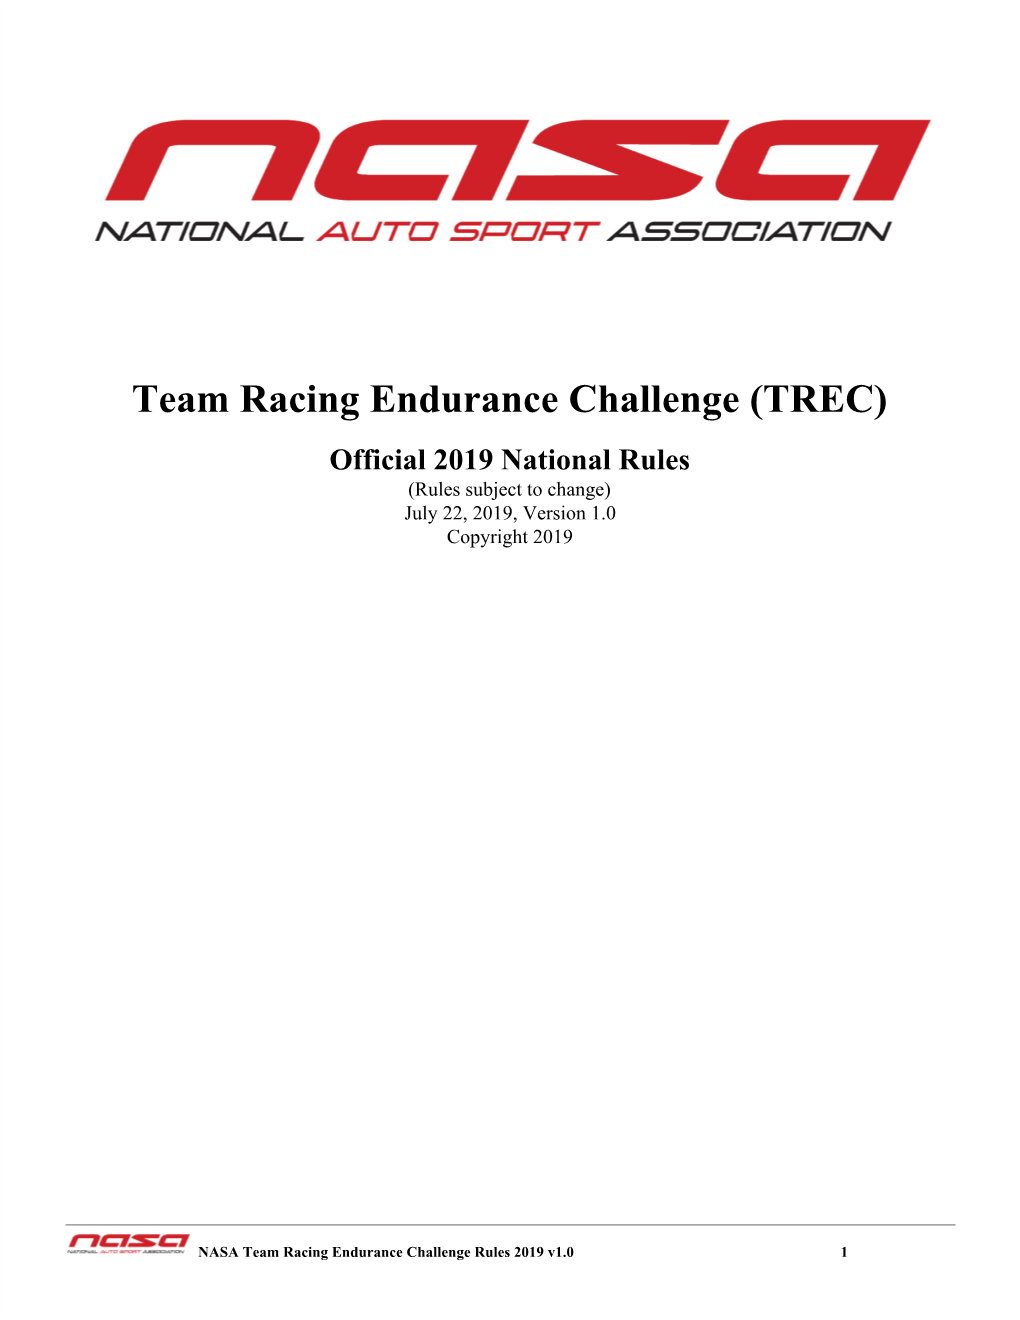 TREC) Official 2019 National Rules (Rules Subject to Change) July 22, 2019, Version 1.0 Copyright 2019